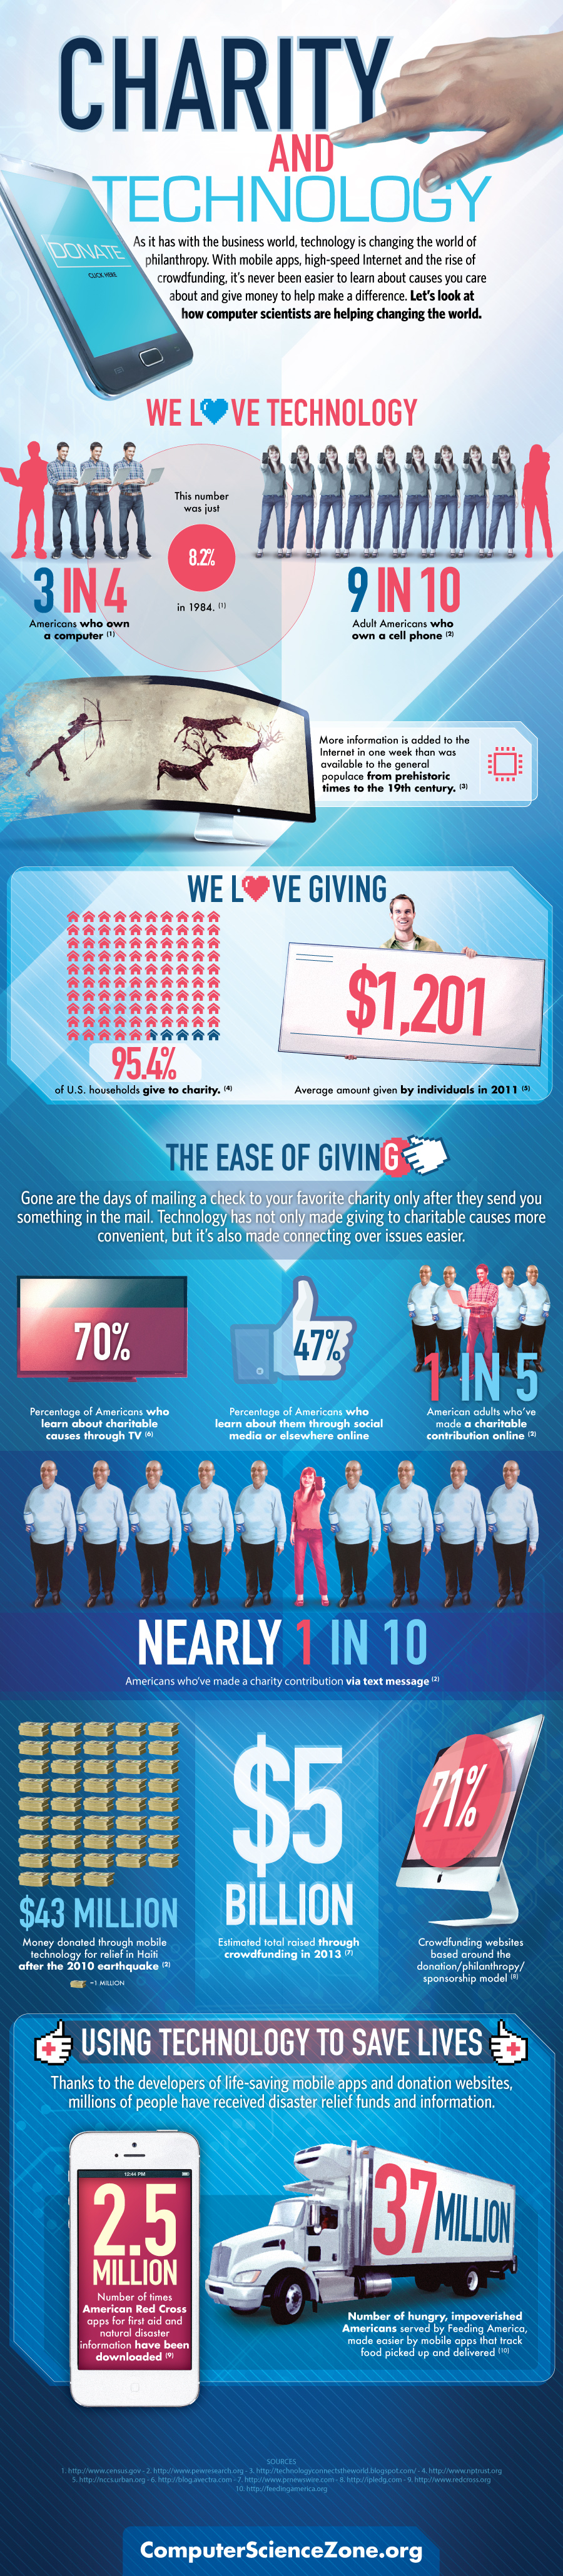 CharityTech Infographic